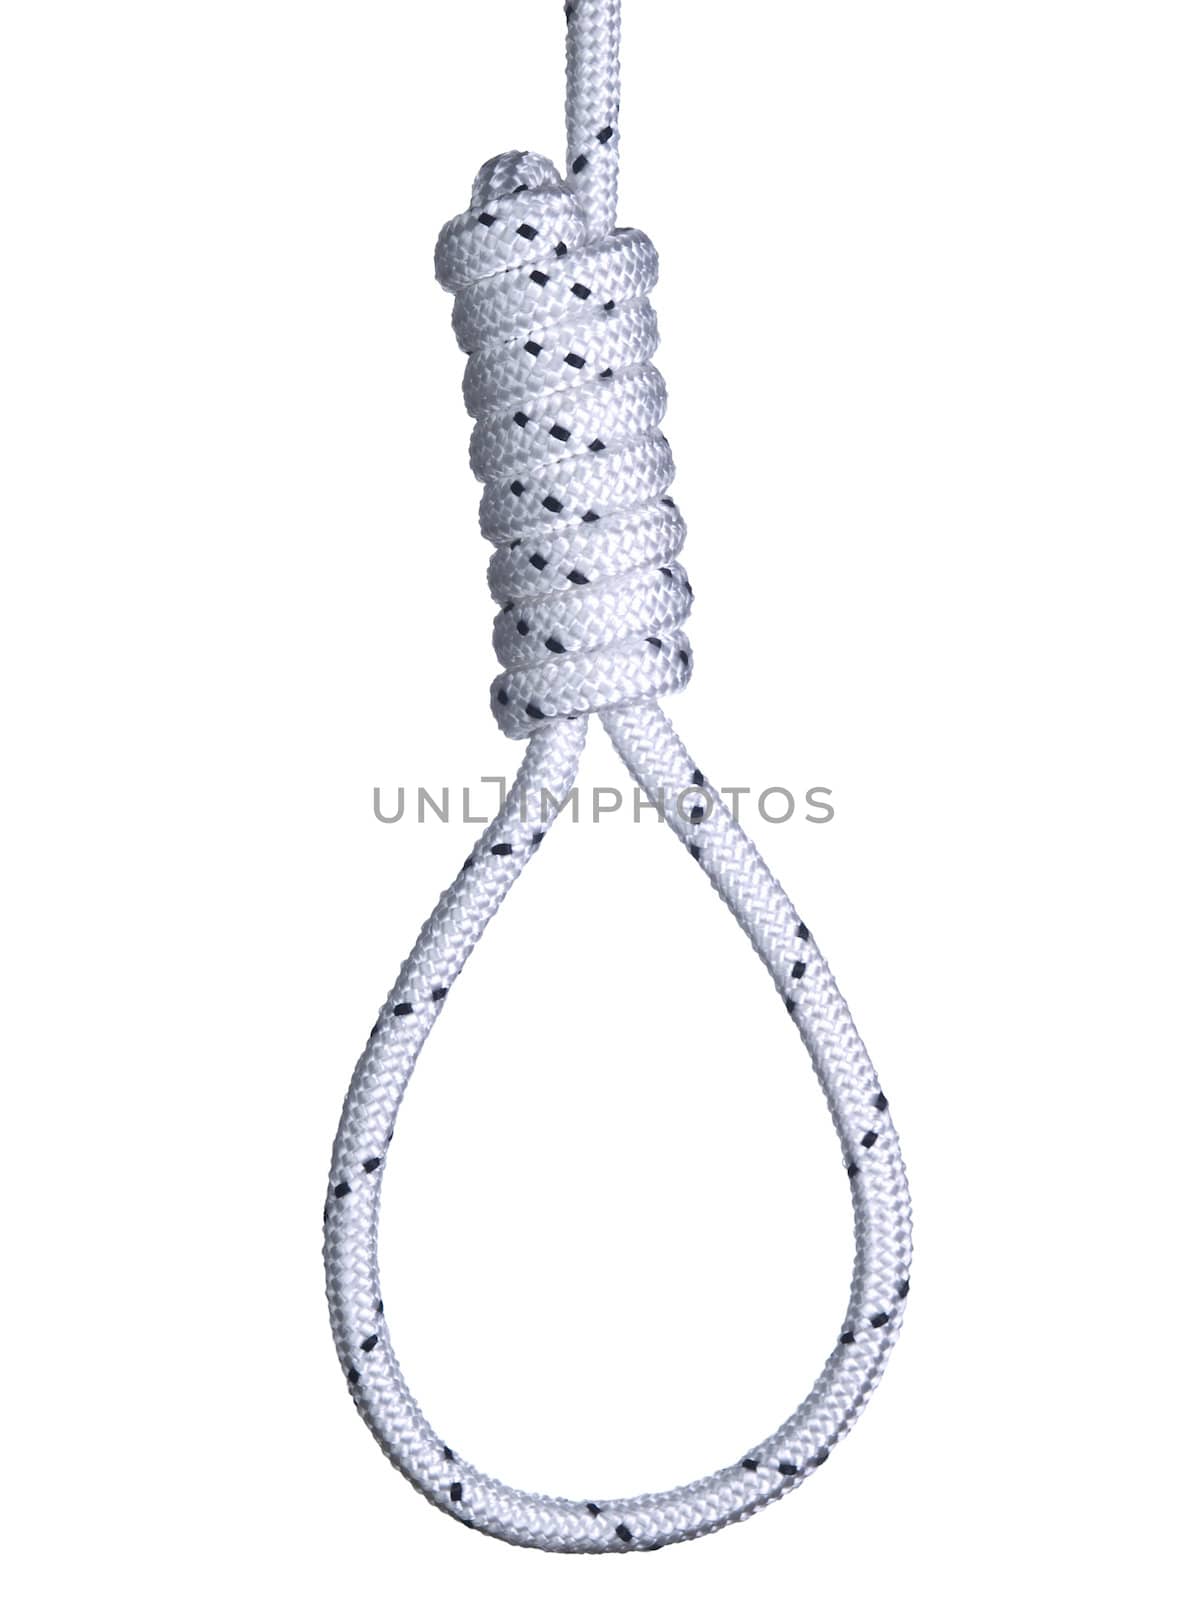 A hangman's noose isolated over a white background.